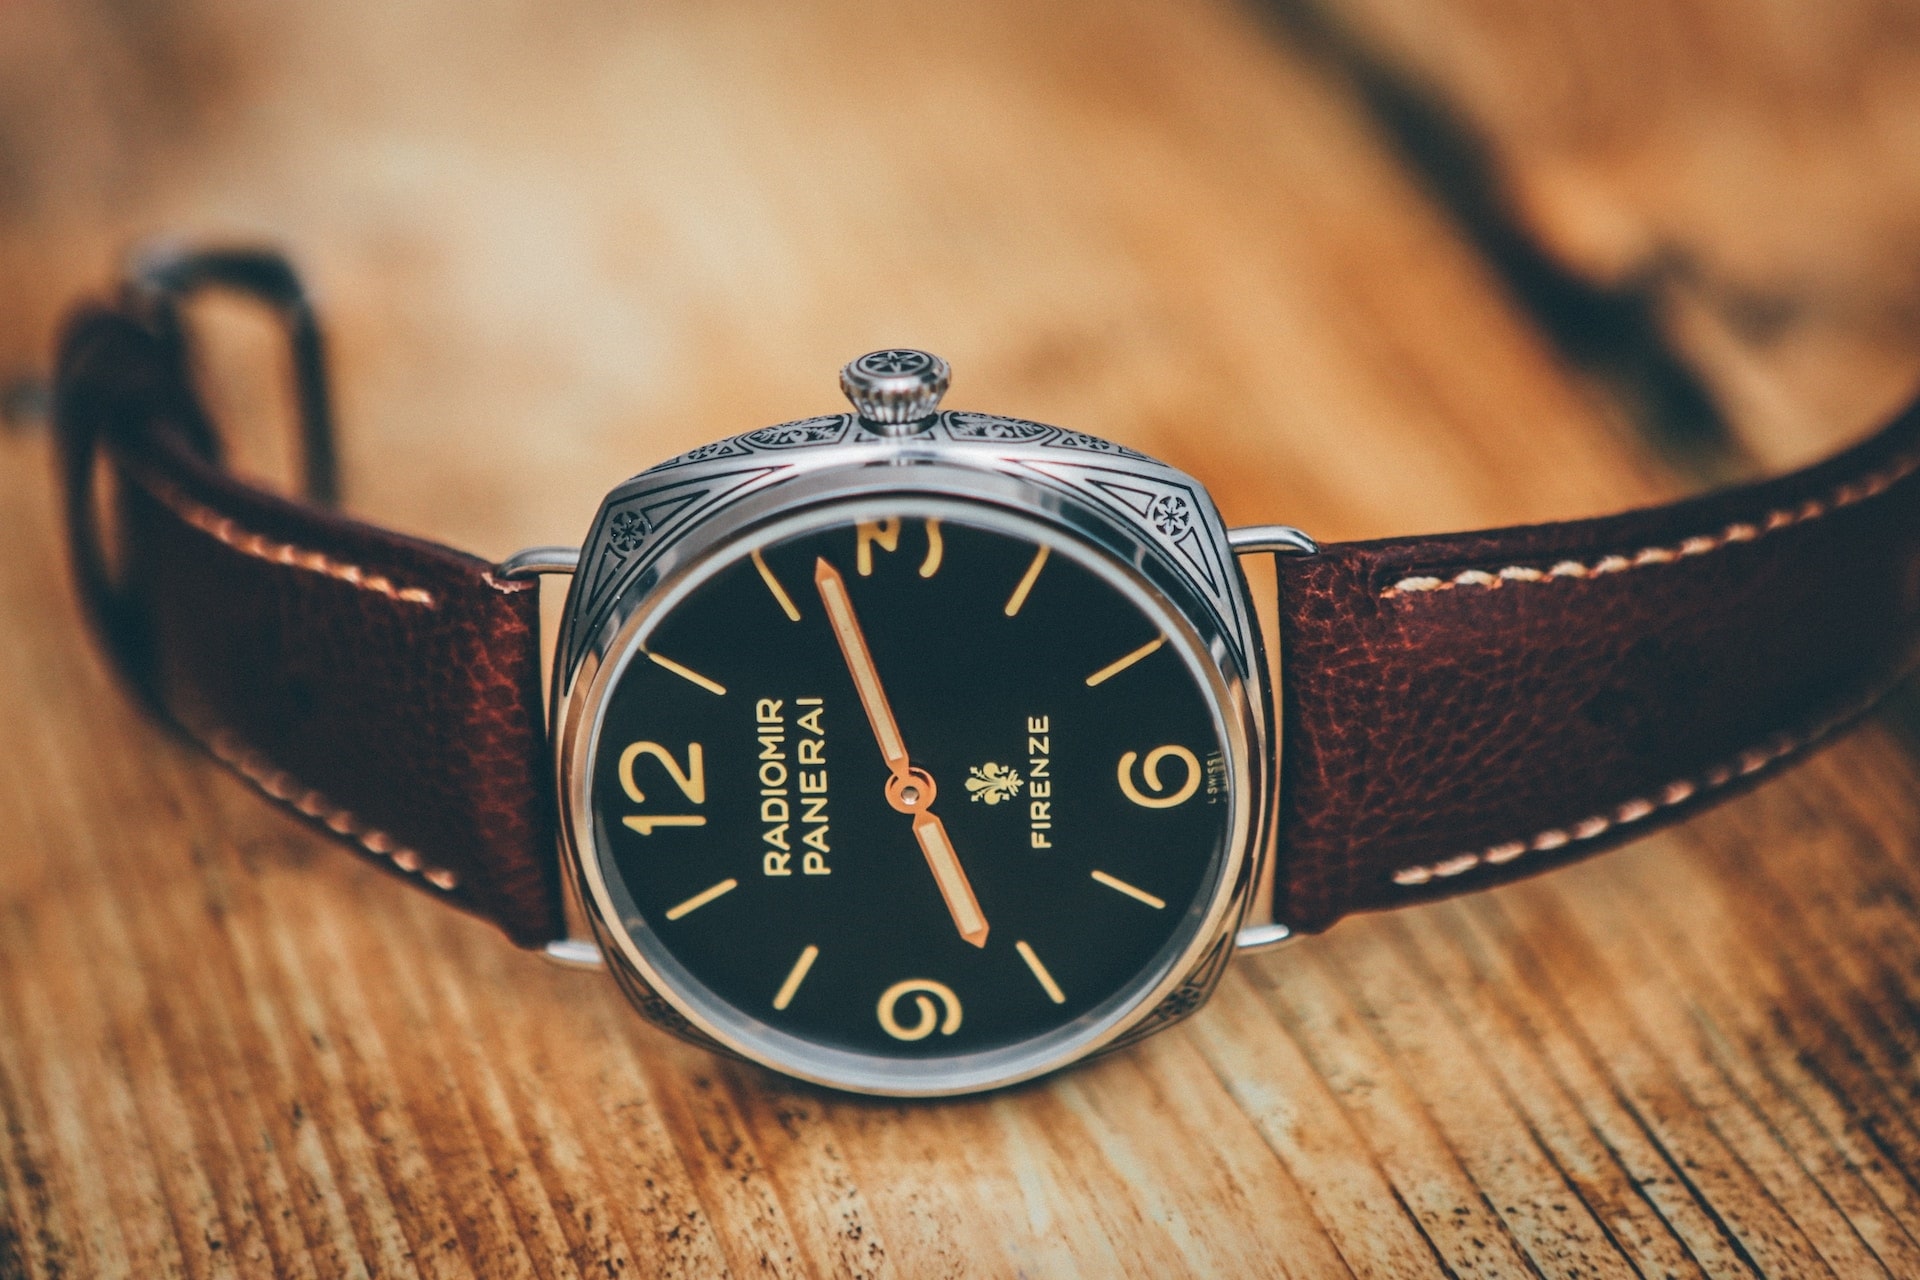 Panerai Radiomir Watch sitting on a wooden table